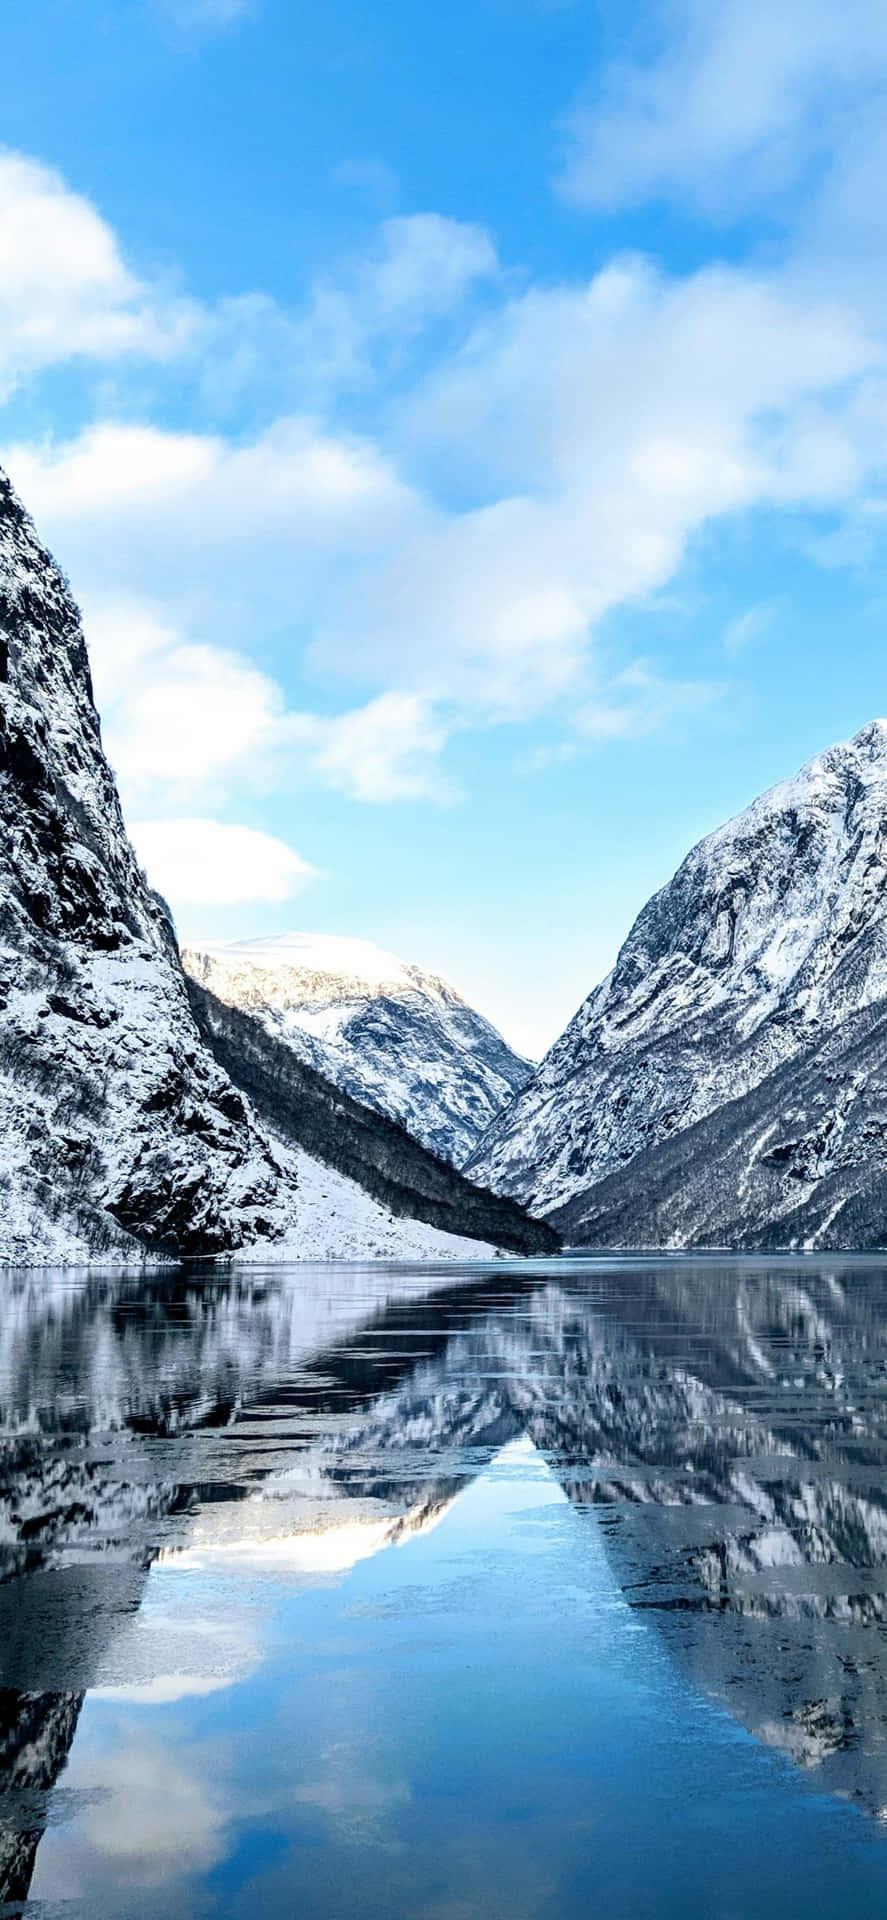 Welcome to the stunning beauty of Norway